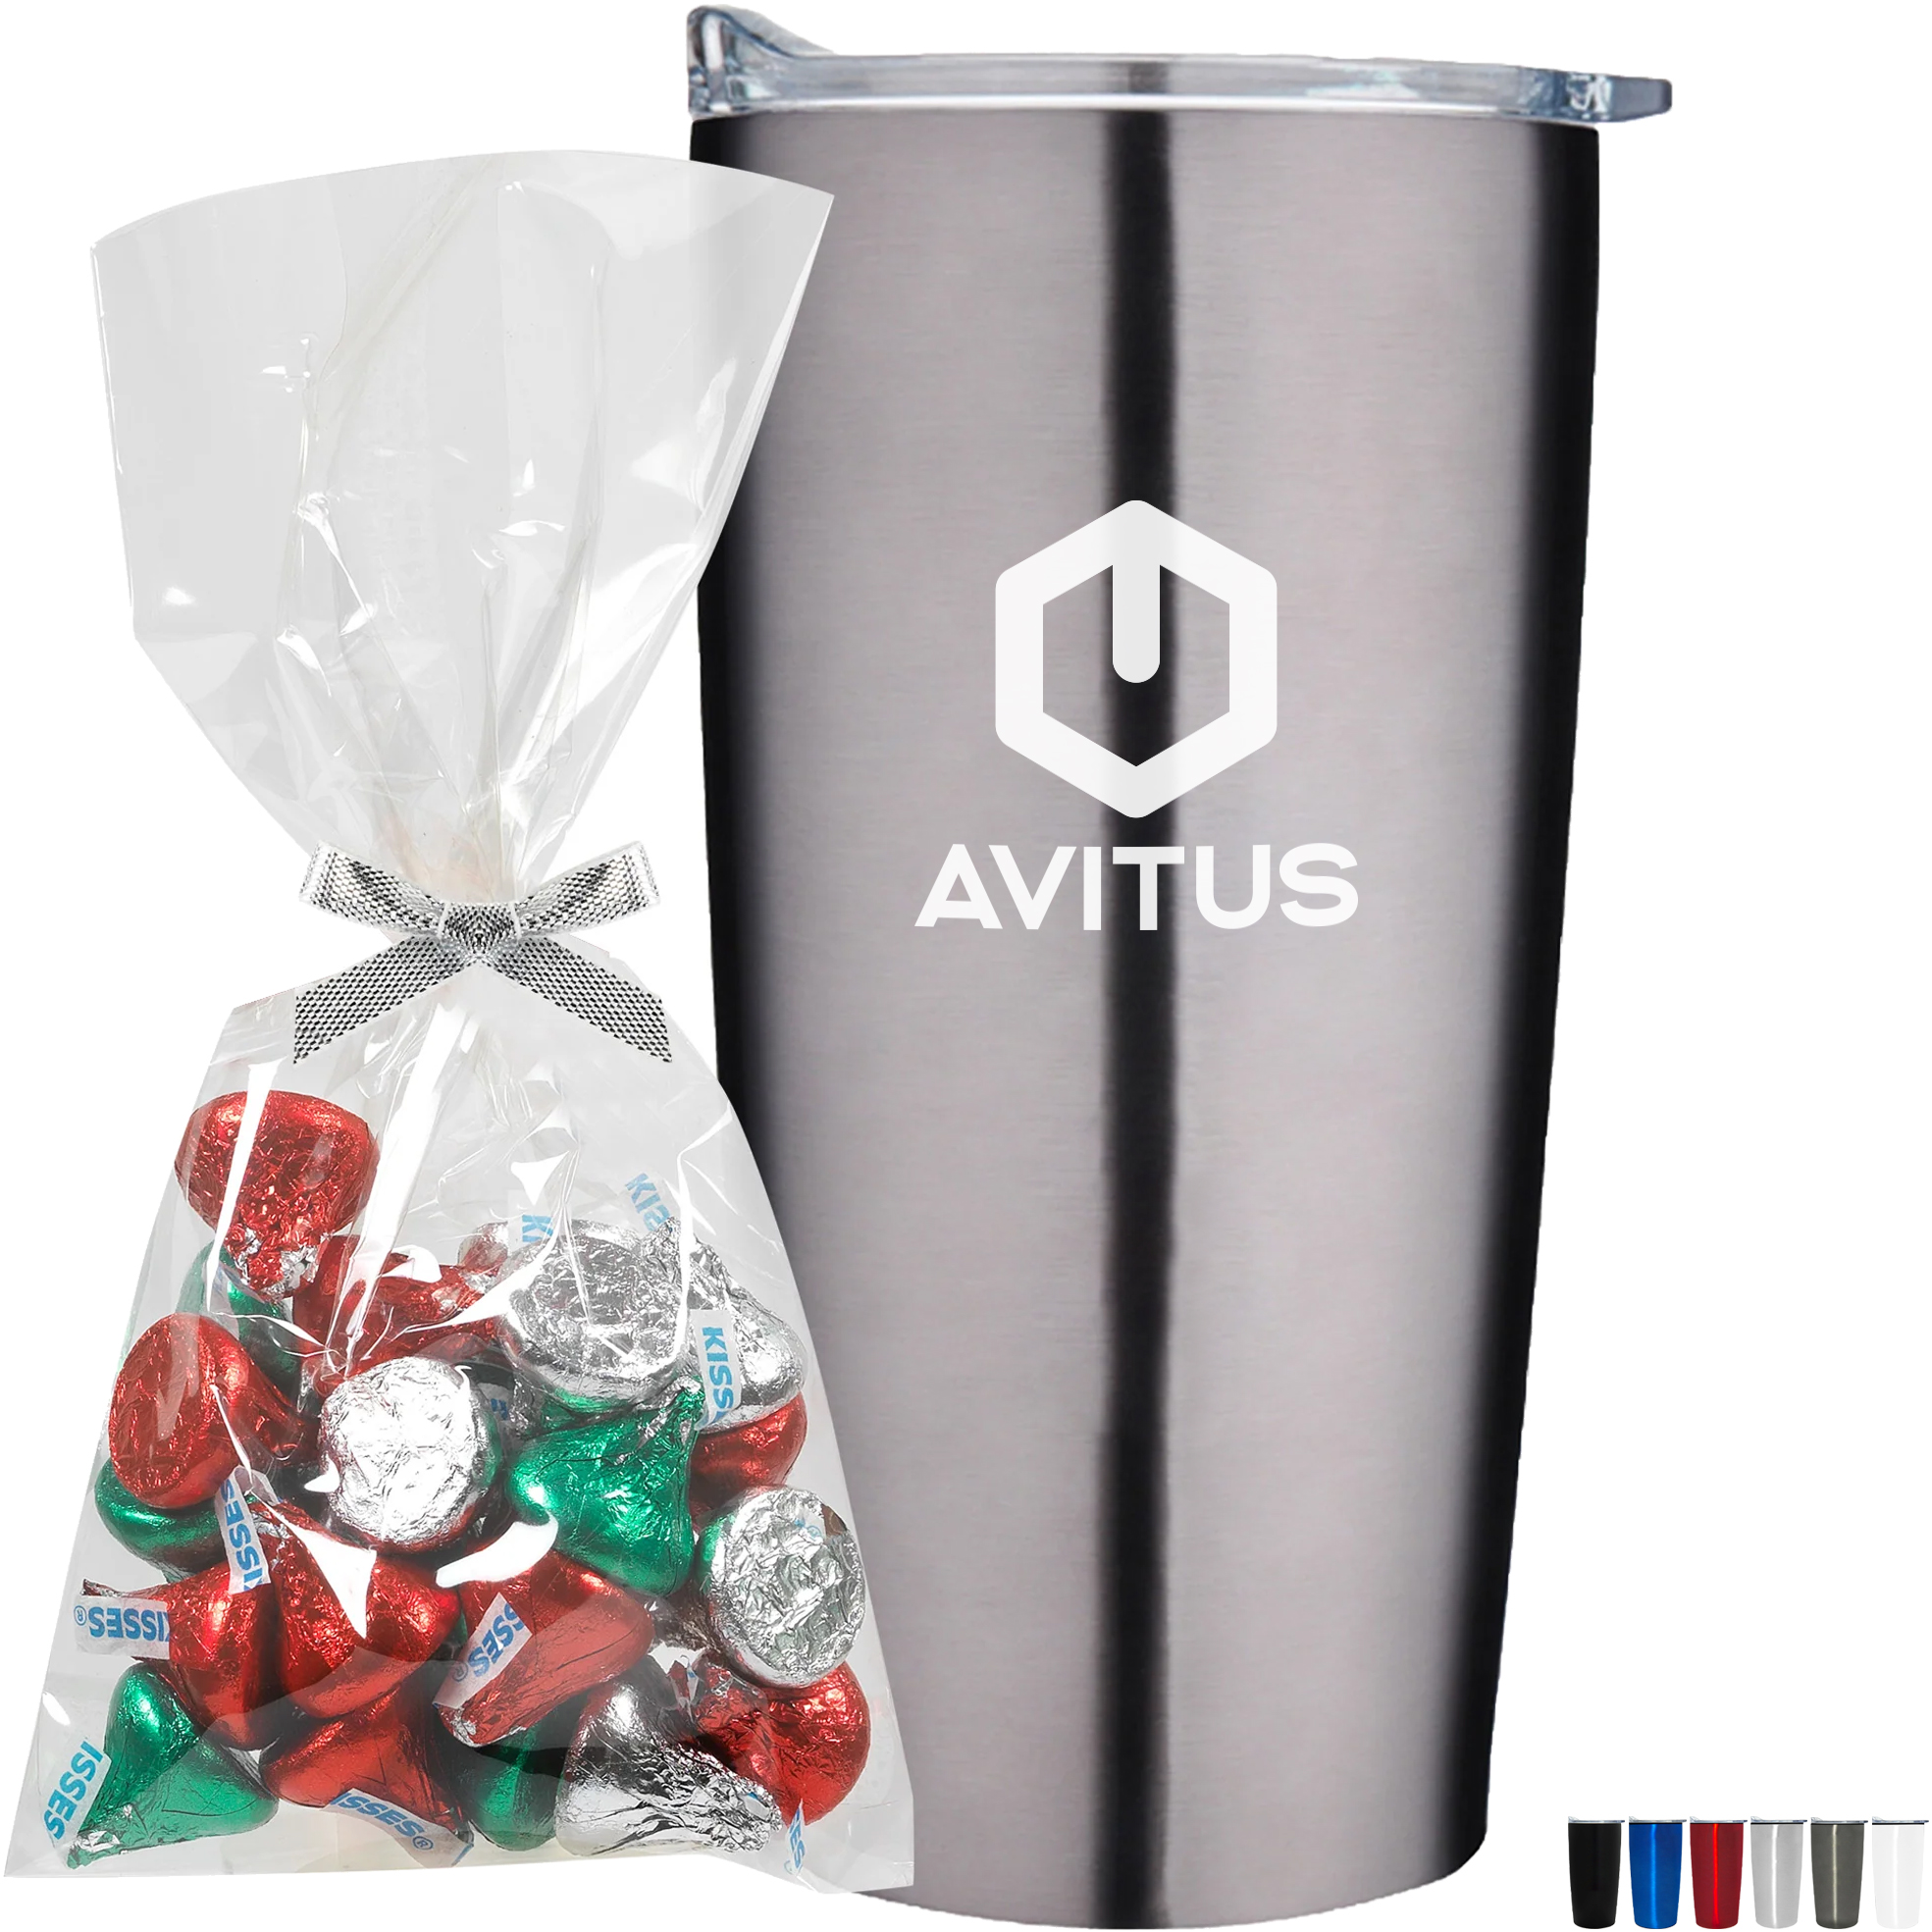 ArtMinds 19oz. White Stainless Steel Tumbler with Straw - Each